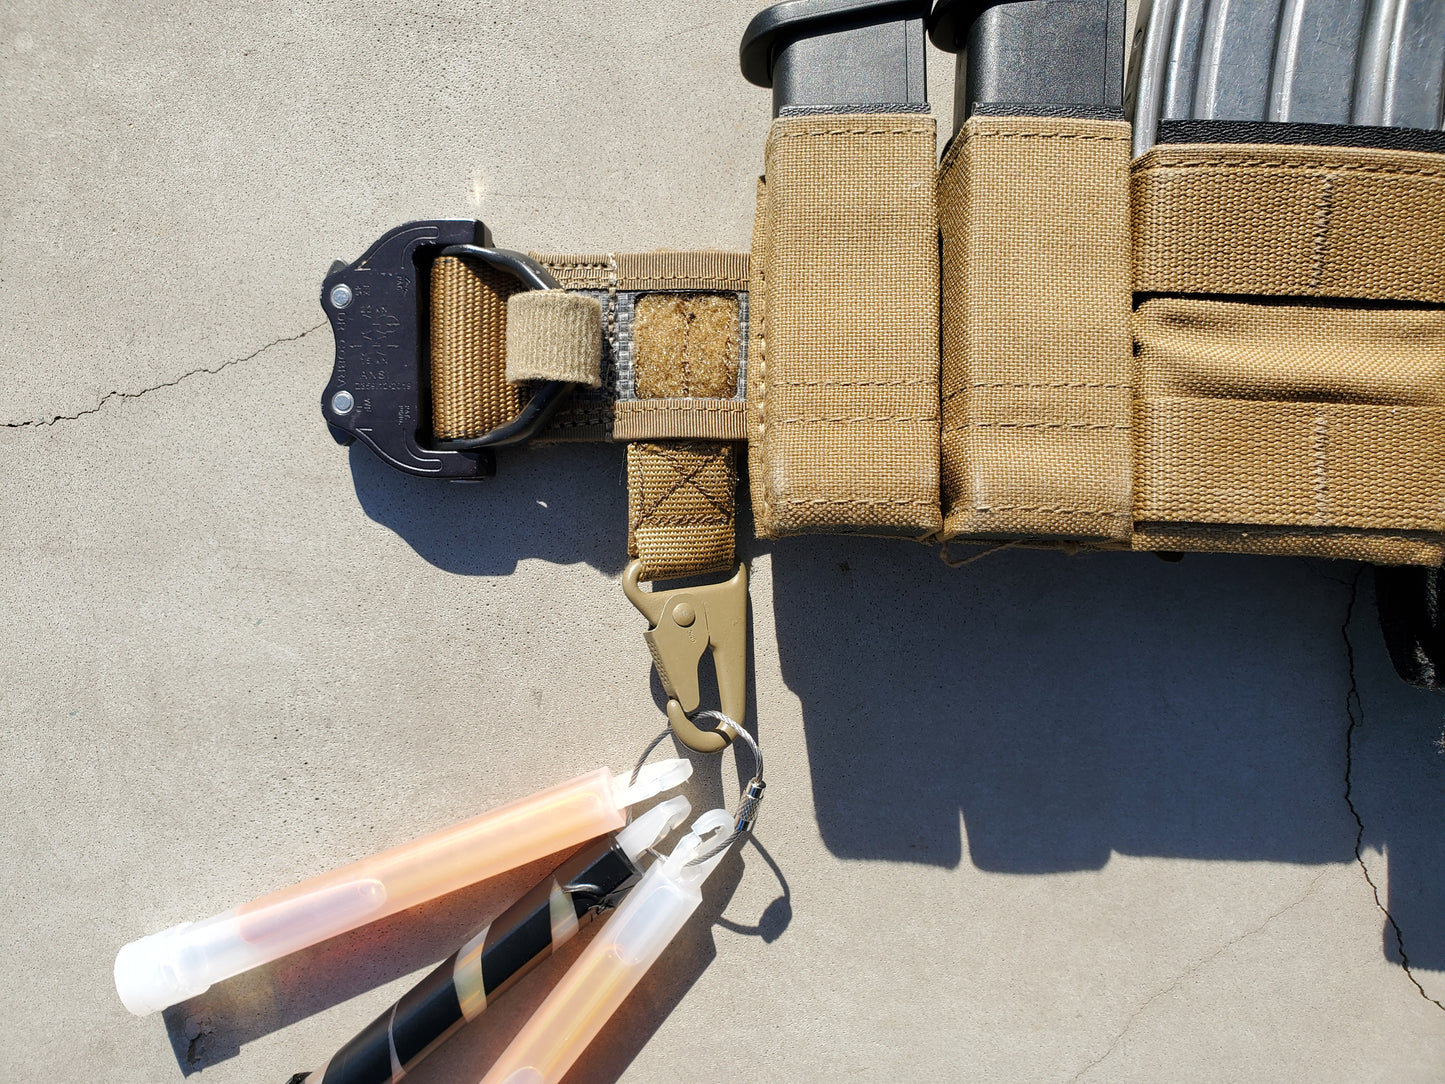 Forge Concepts Utility Hook on GBRS Assaulter Belt with Esstac Kywis and chemlights